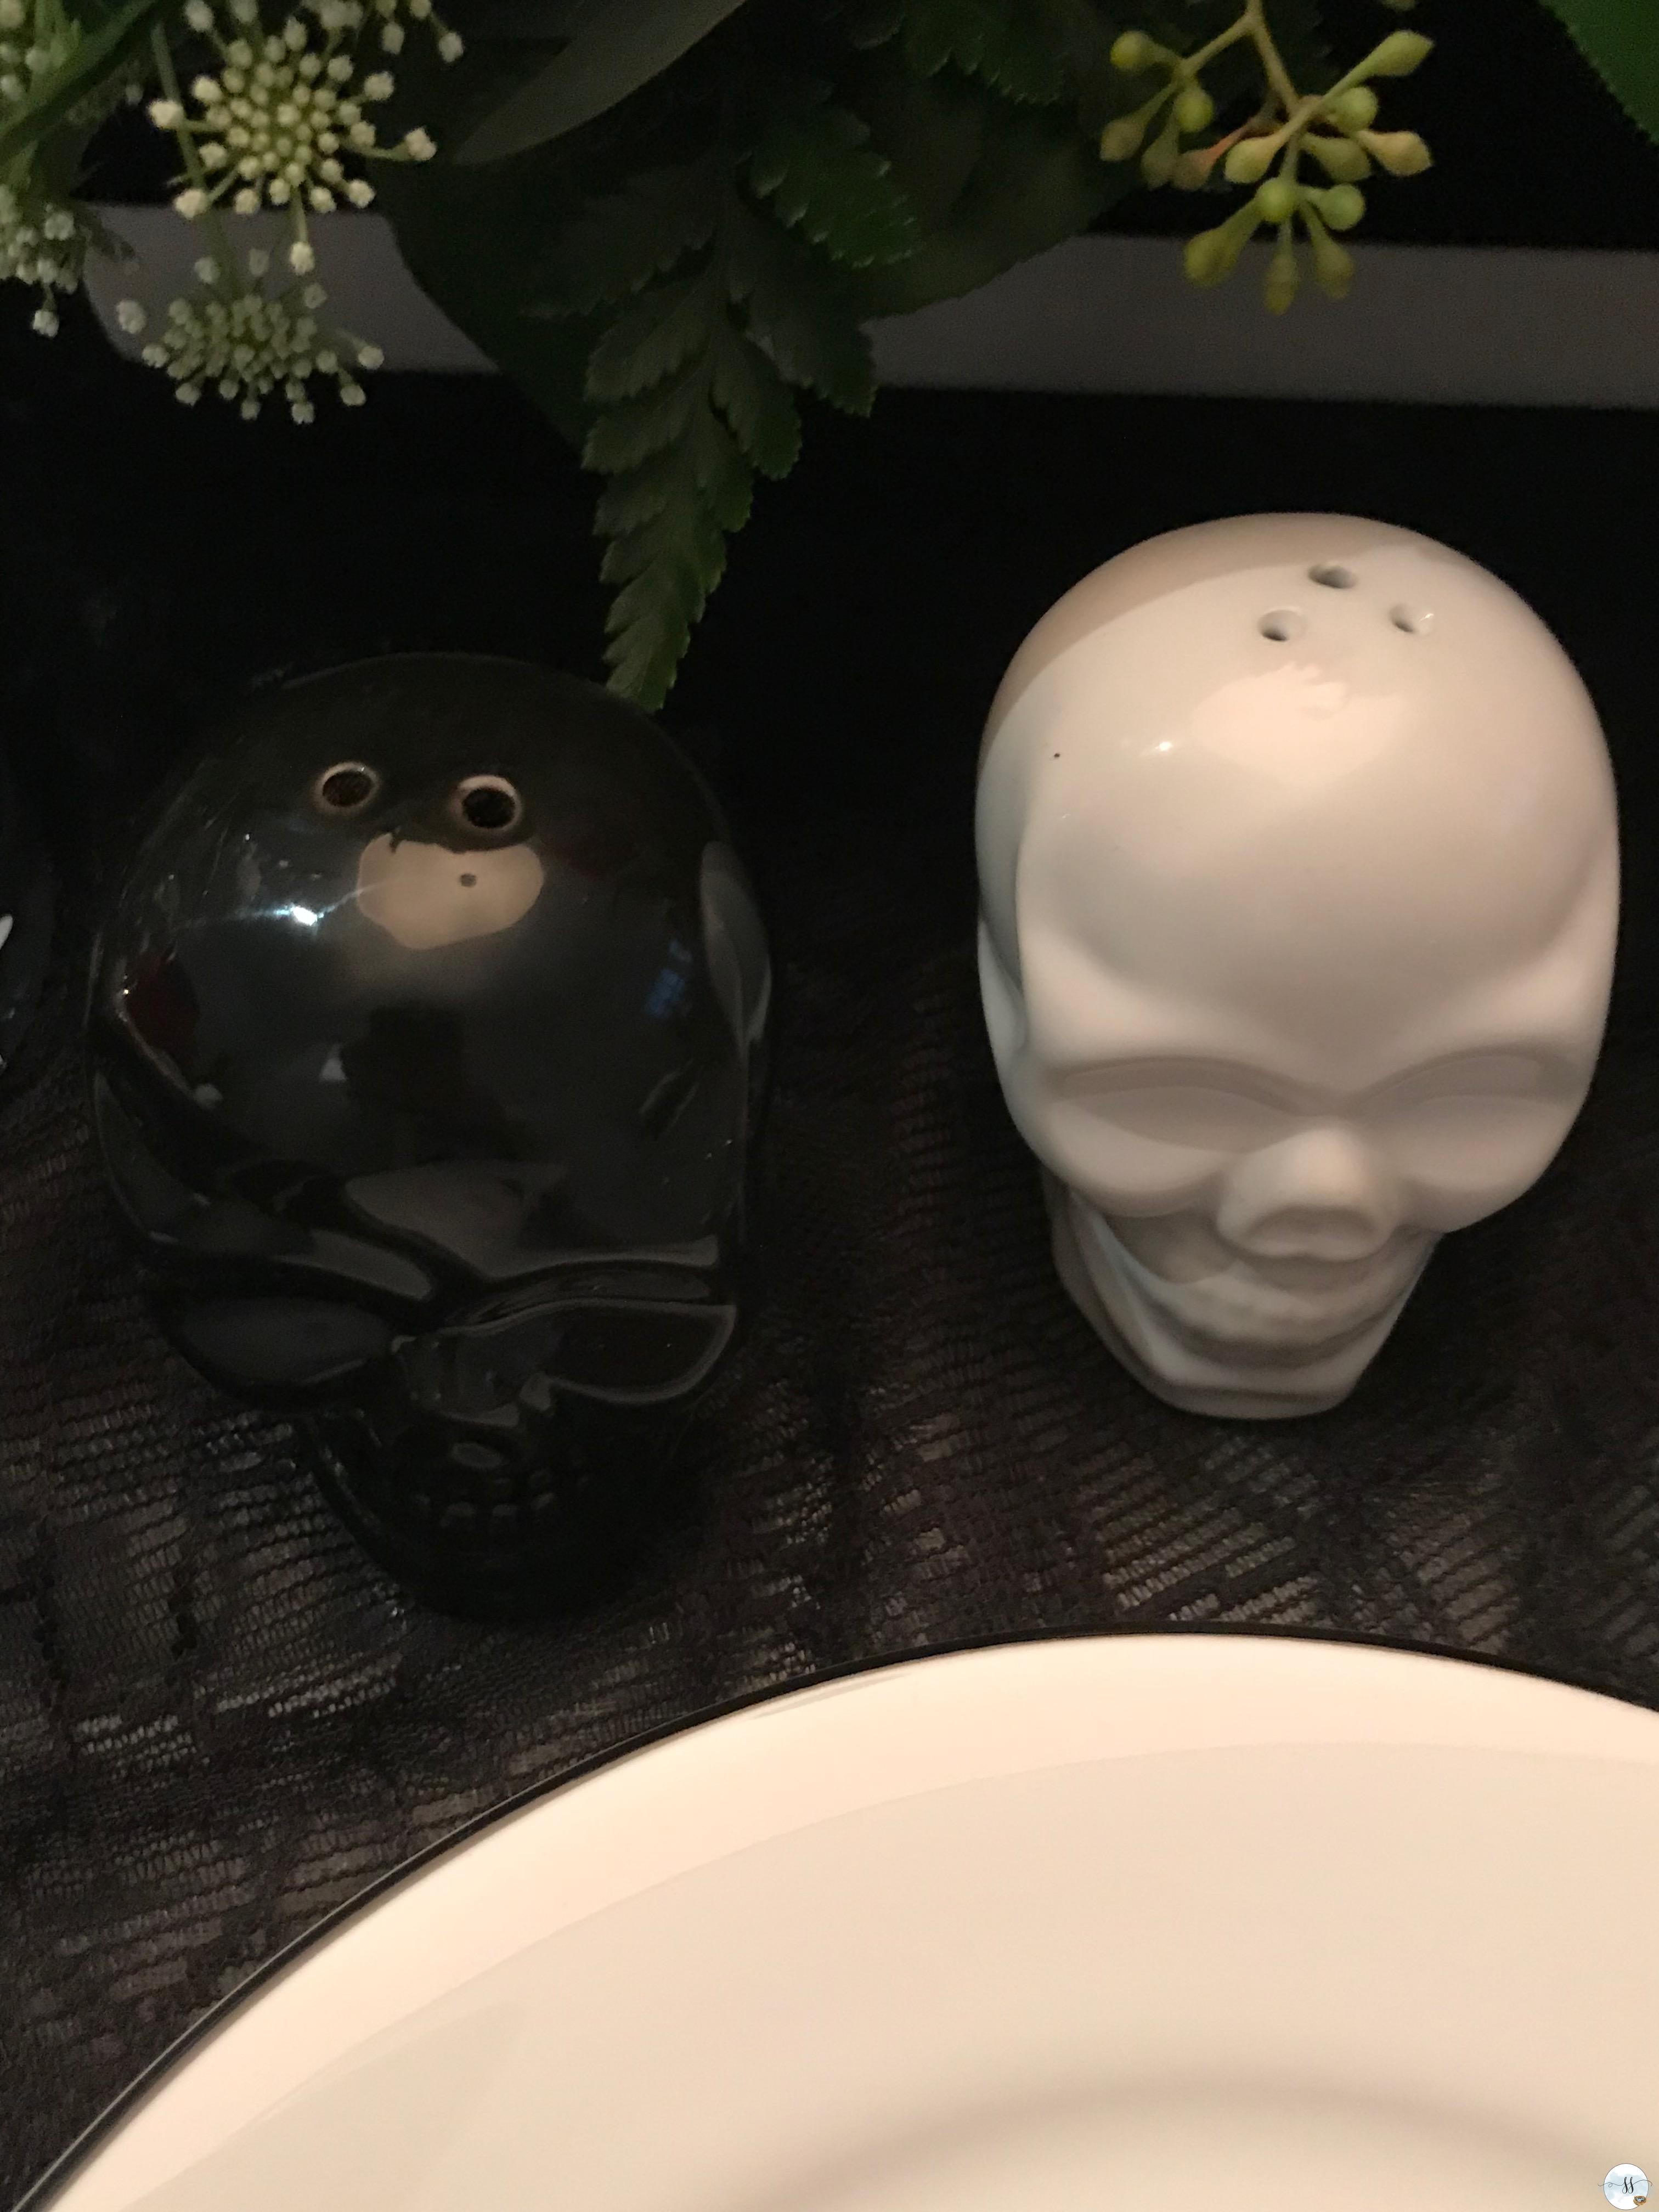 Fun Gothic table setting at Halloween